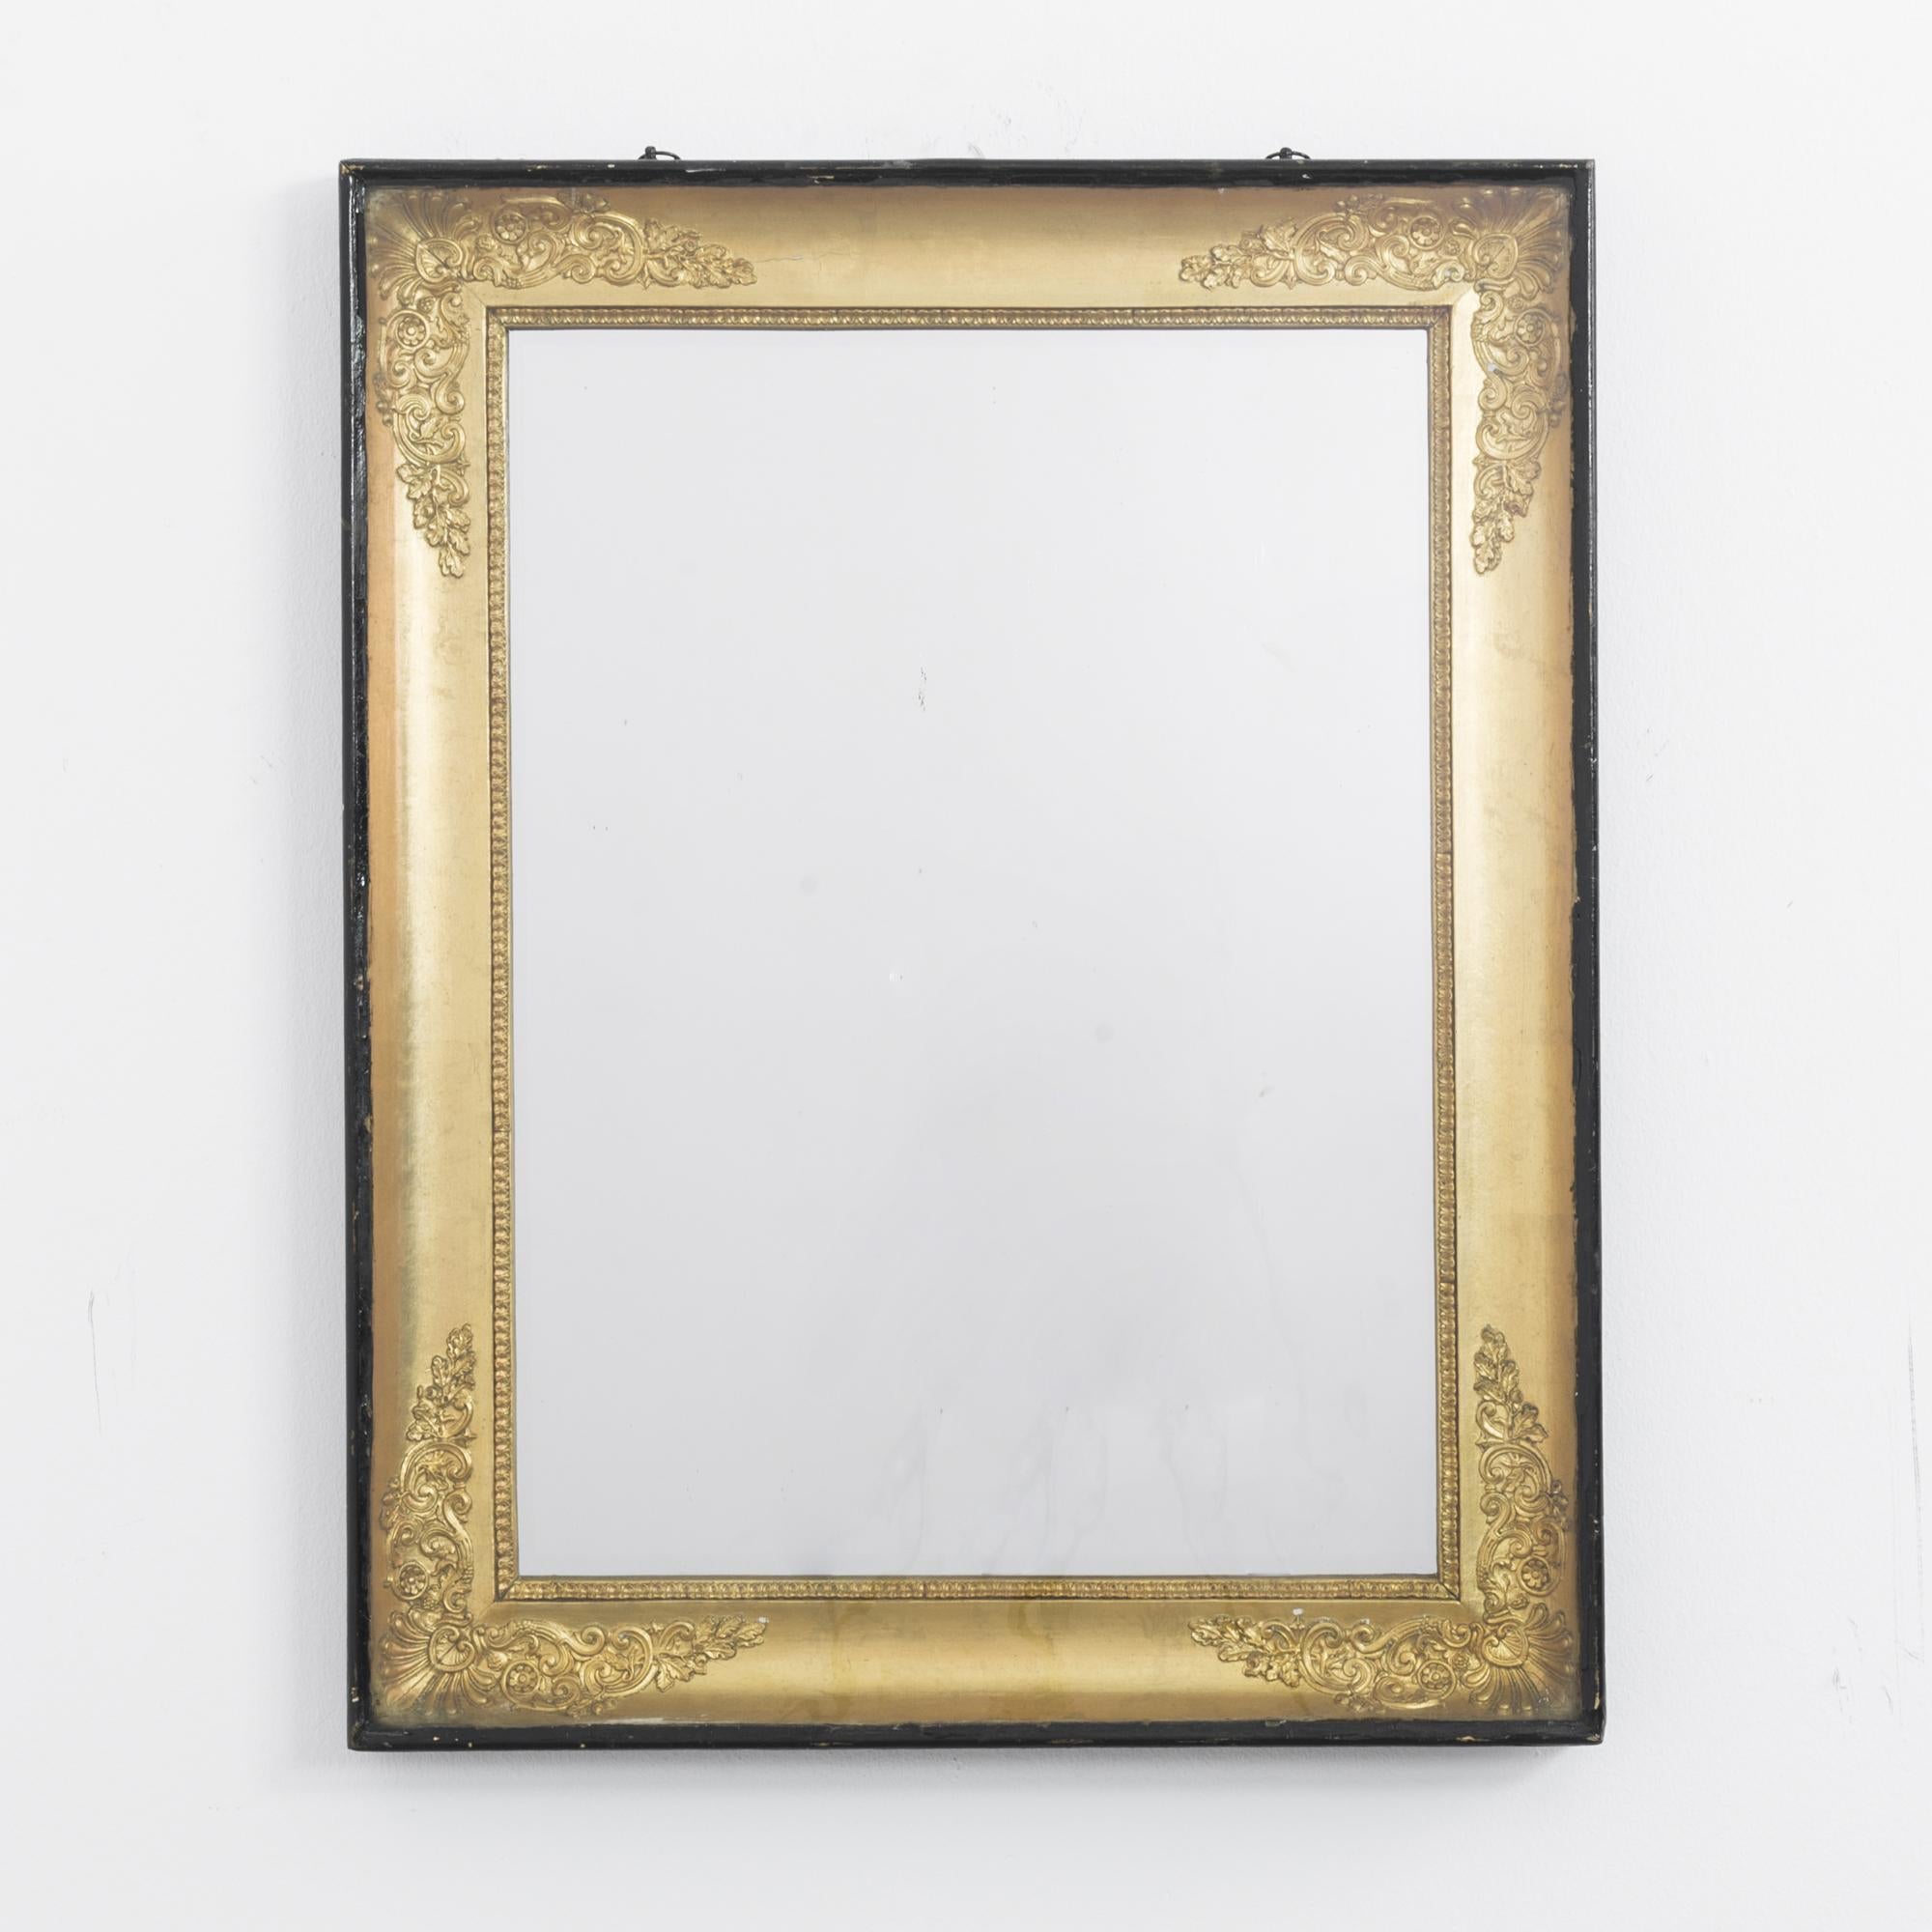 Made in France, circa 1880, this mirror features a decorative wooden frame. The neoclassical influence can be observed in the intricate plaster moldings of foliage, tendrils, and a scallop shell in each corner. A box frame, painted black,